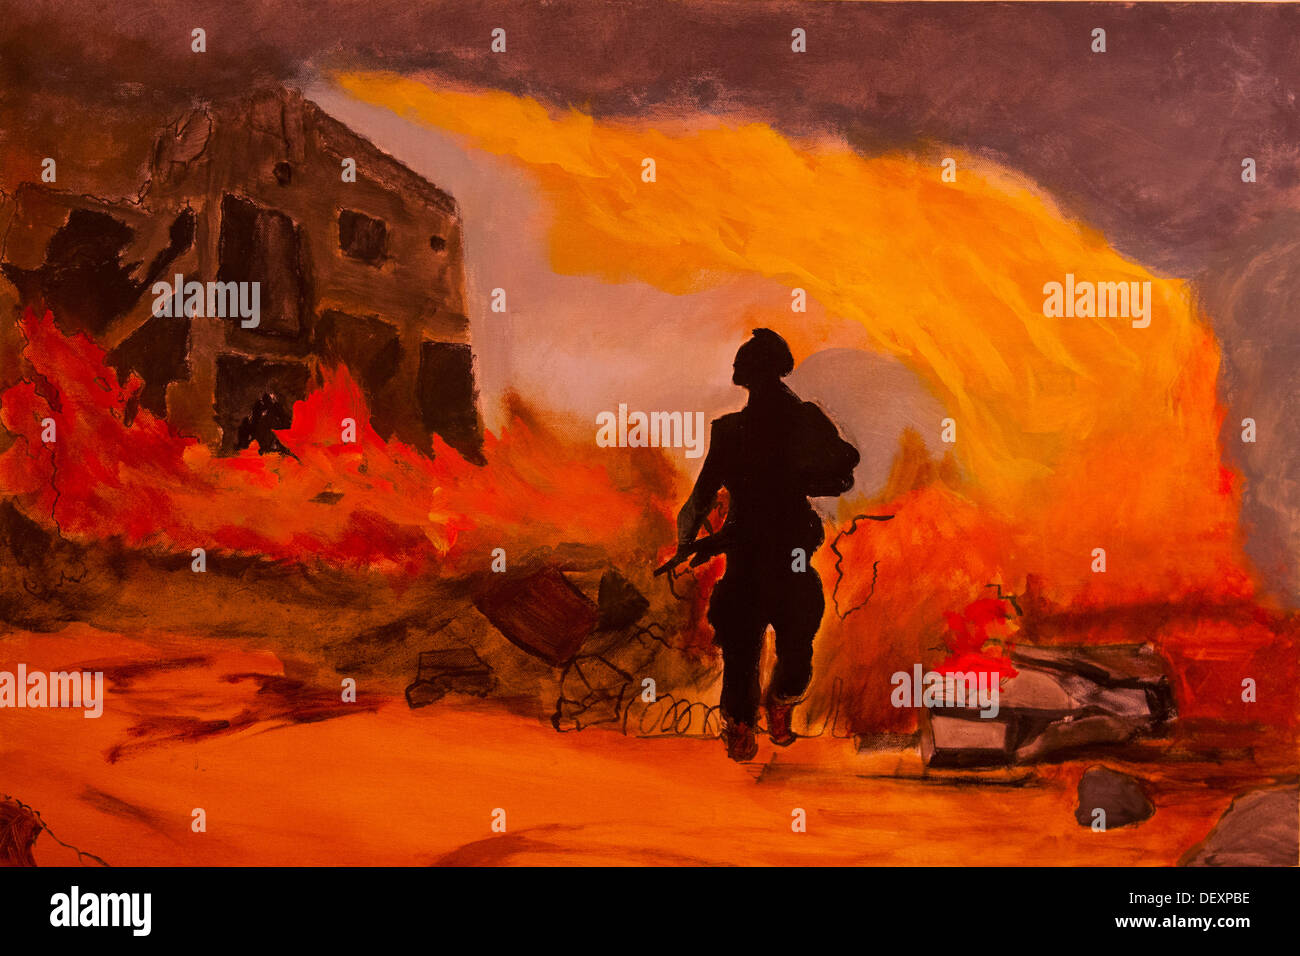 SAN DIEGO, Calif. -- A war fighter is silhouetted in fire in one of the paintings featured in the Combat Arts exhibit in the Southwestern University art gallery, Sept. 14, 2013. The paintings in the exhibit were all created by Iraq and Afghanistan war vet Stock Photo